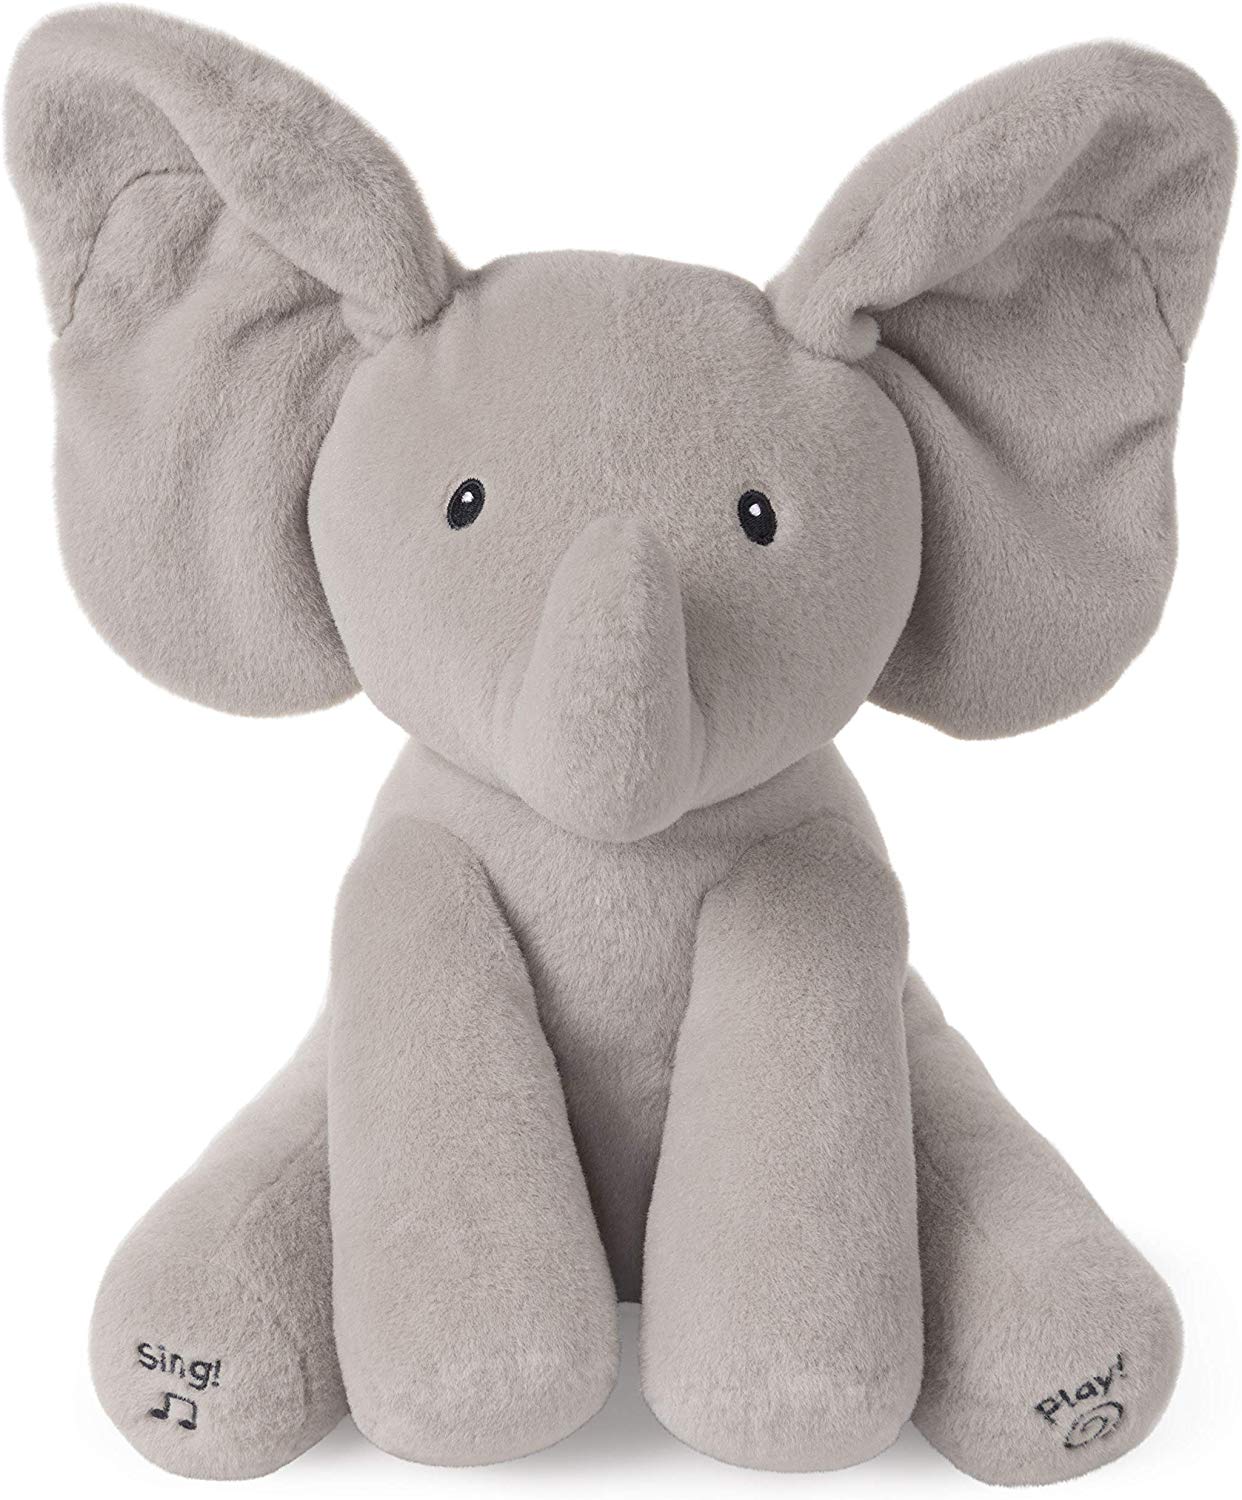 Best Gifts For Two Year Old 2022: Gund Animated Elephant 2022